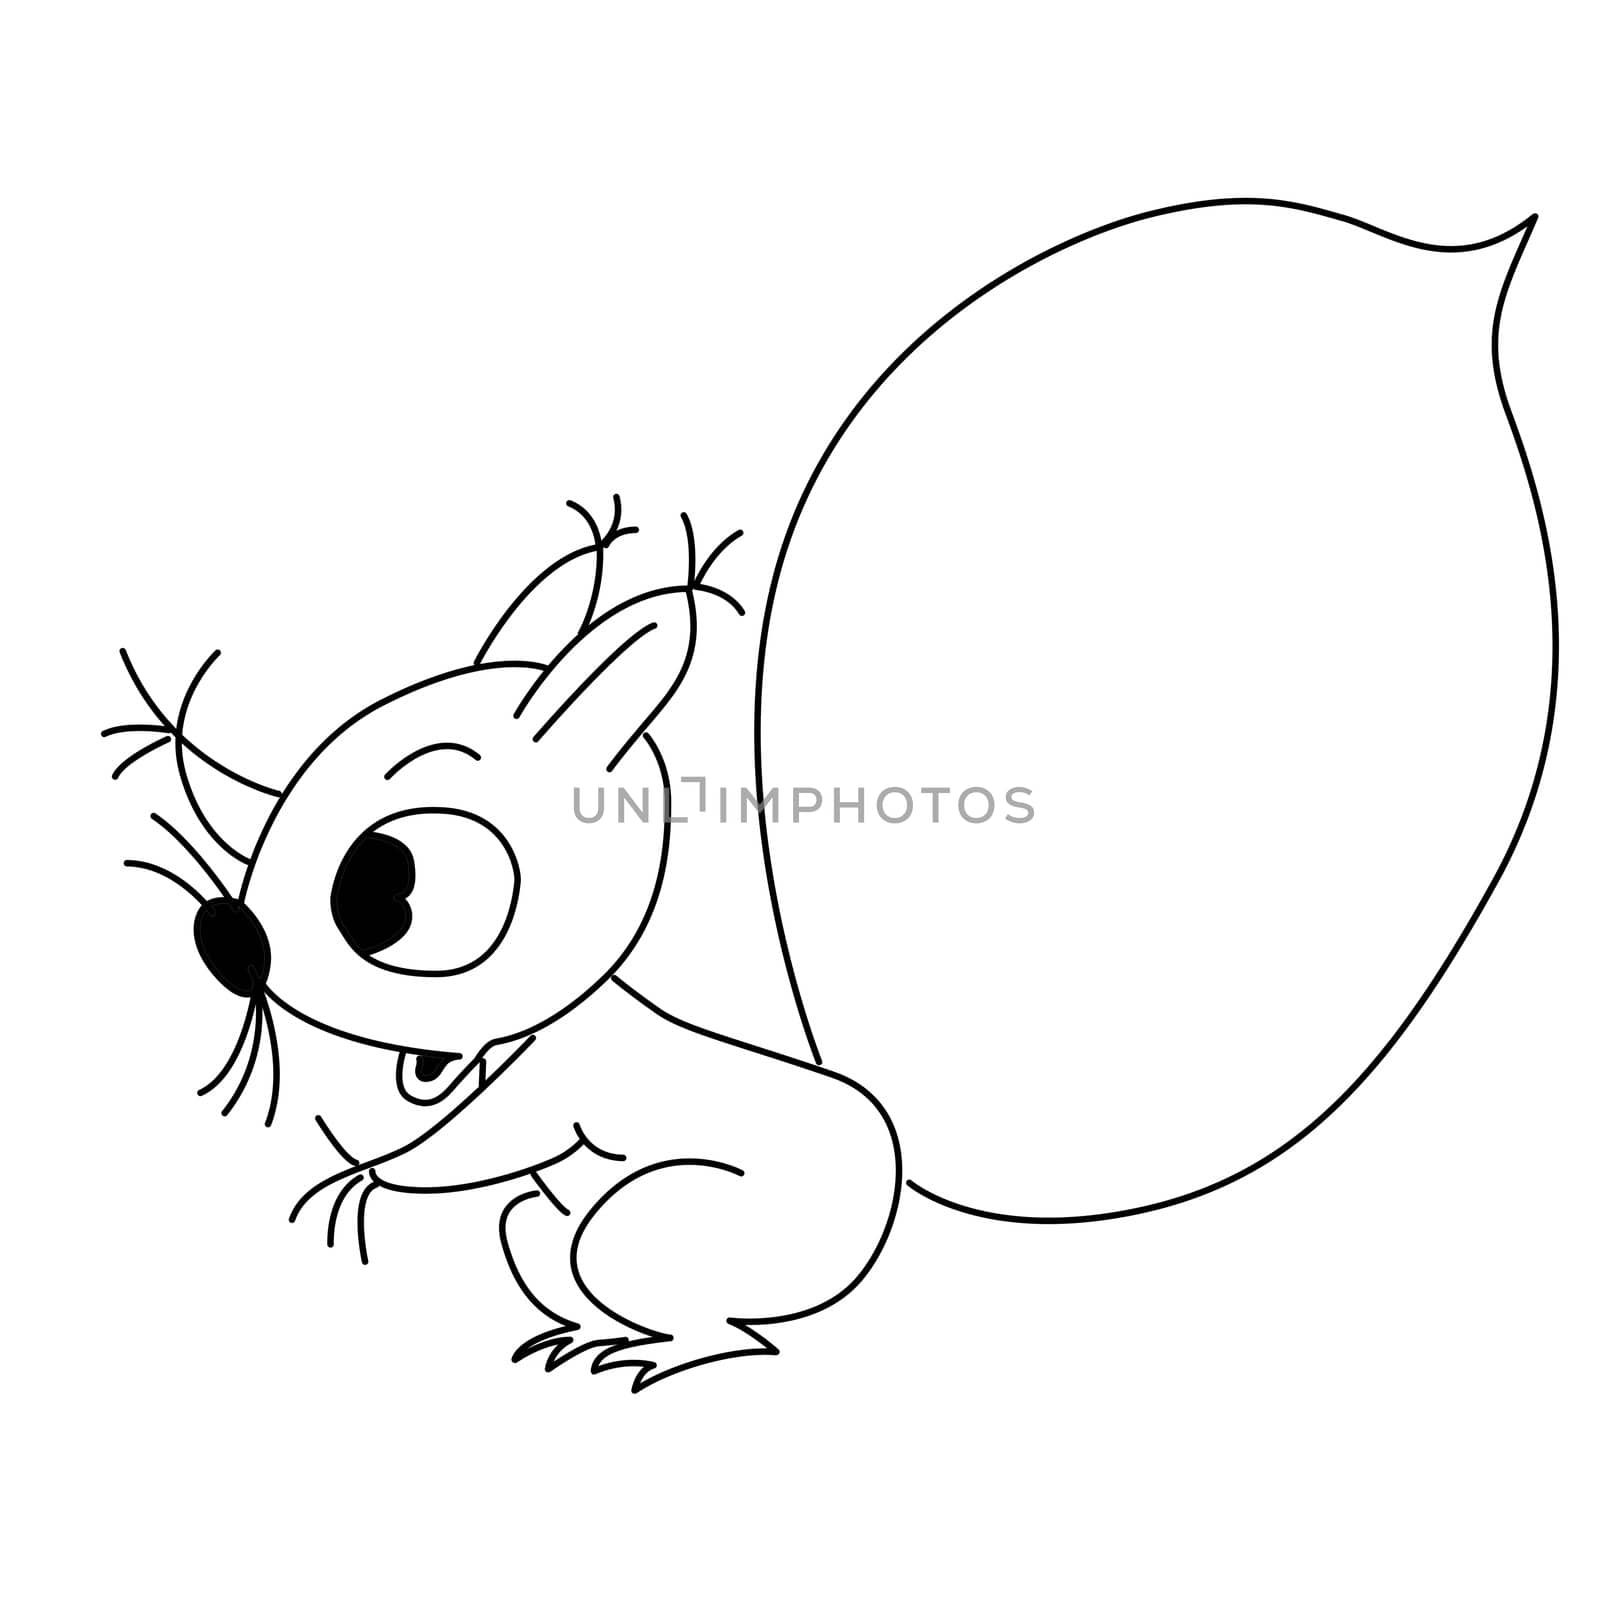 drawing squirrel on white background by basel101658